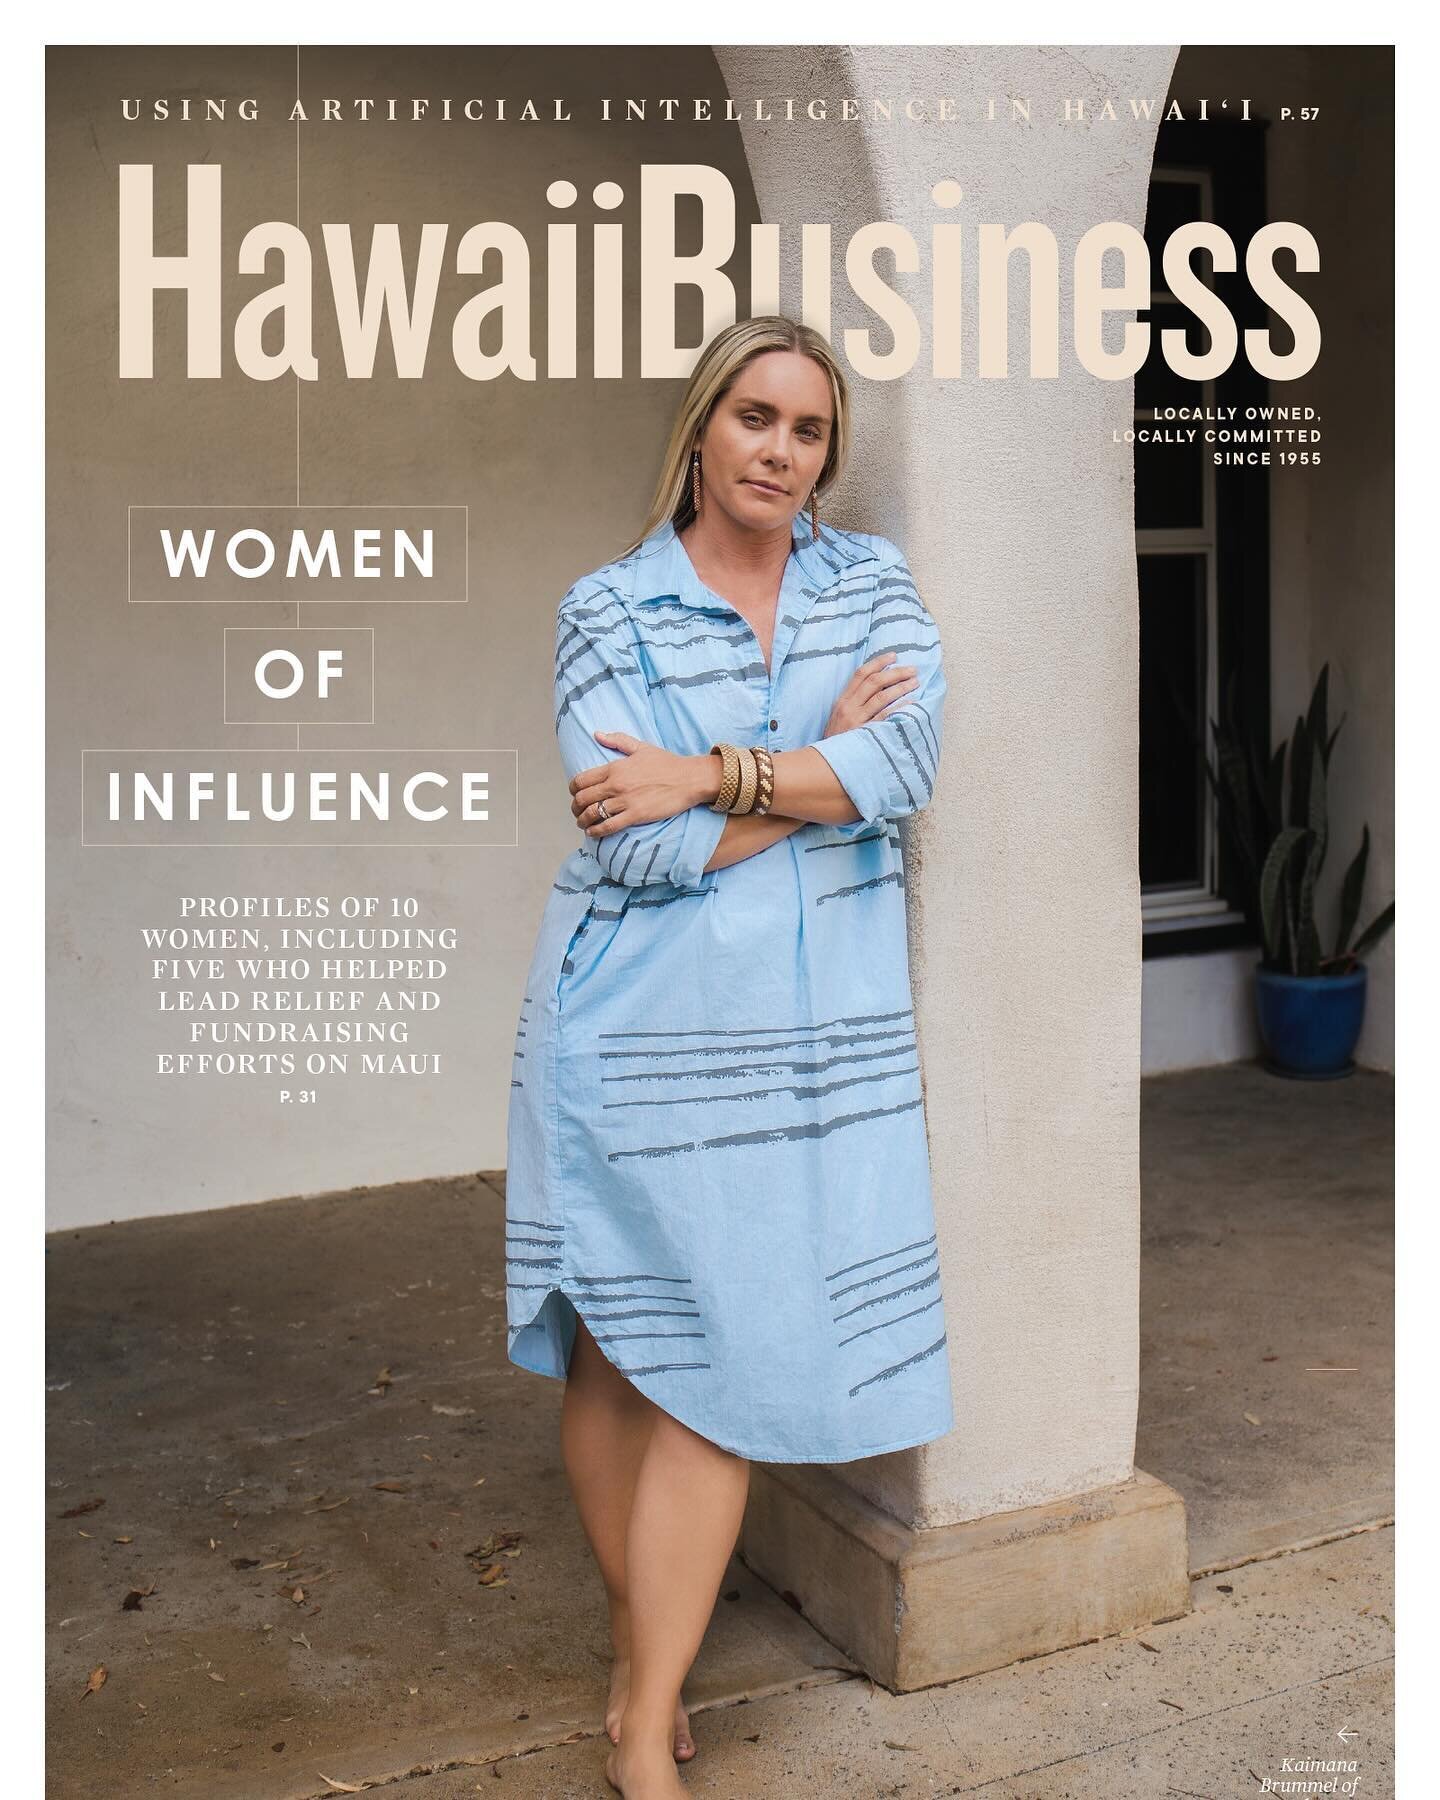 Throwback to October when I had the honor of photographing some mana wahine for Hawaiʻi Business Magazine &amp; getting featured on the cover. The whole process of photographing and getting to speak with these inspiring women was so fulfilling. &amp;